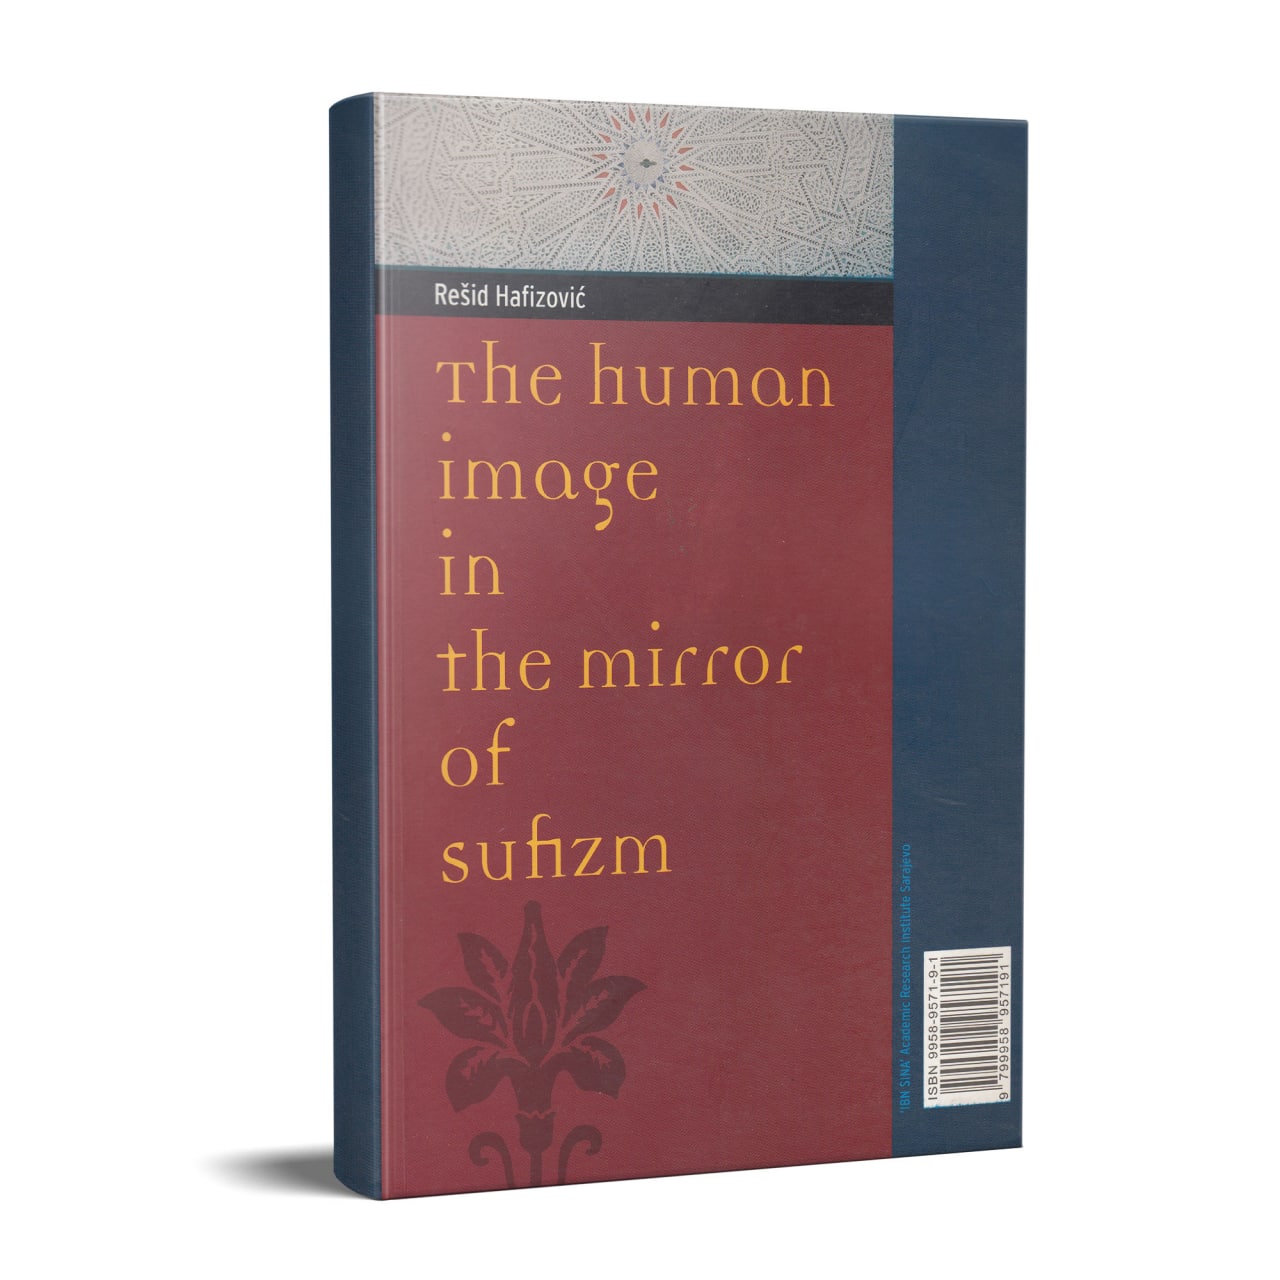 The human image in the mirror of Sufism